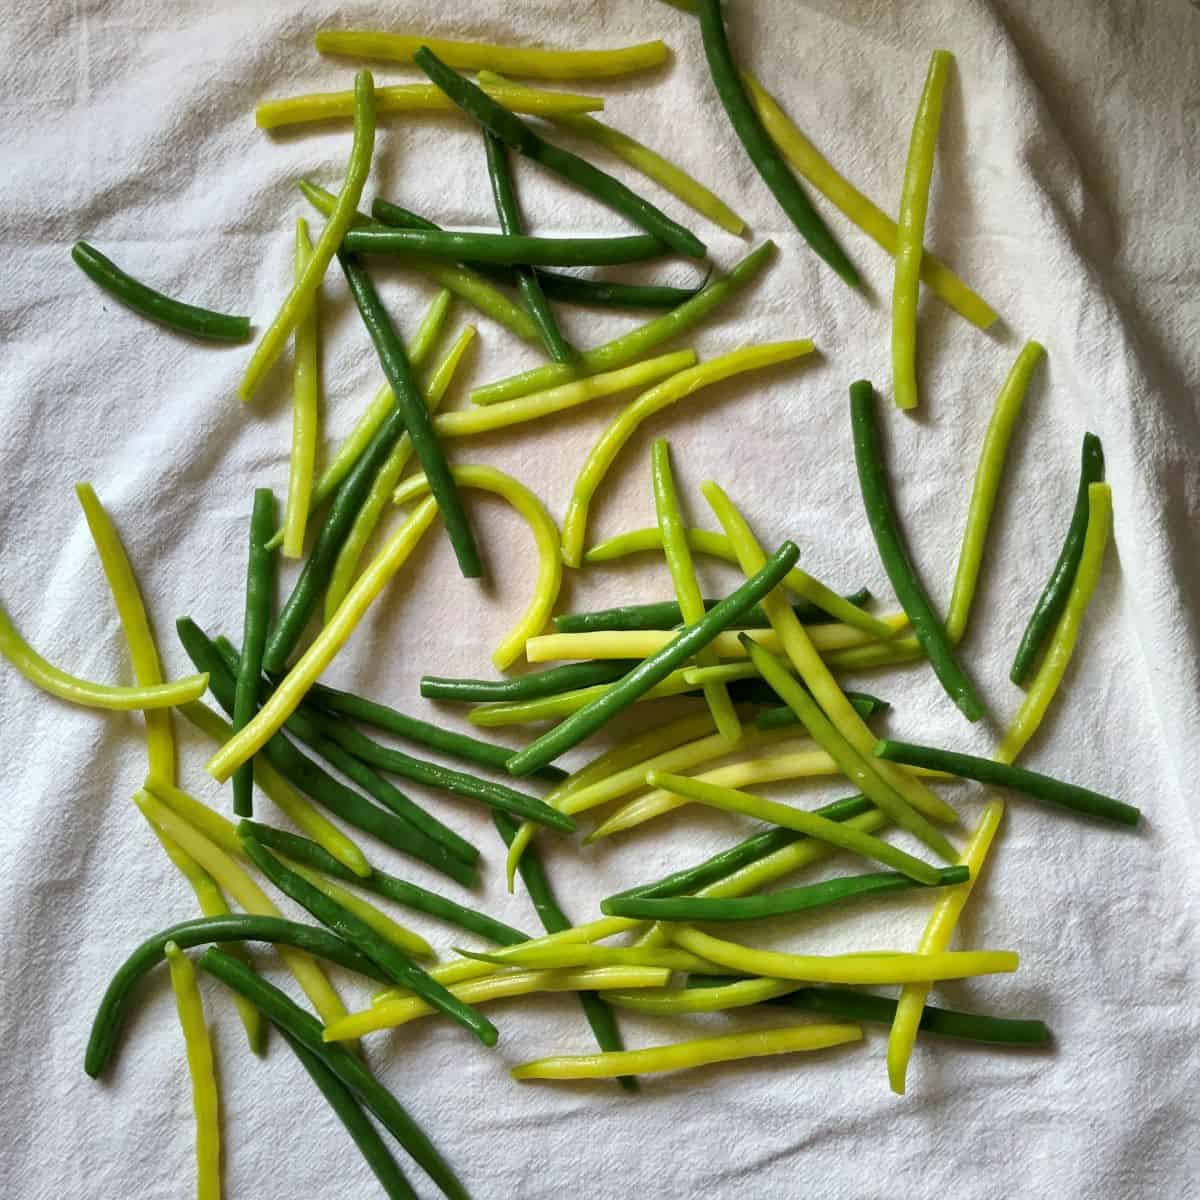 Yellow and green beans on a white tea towel.